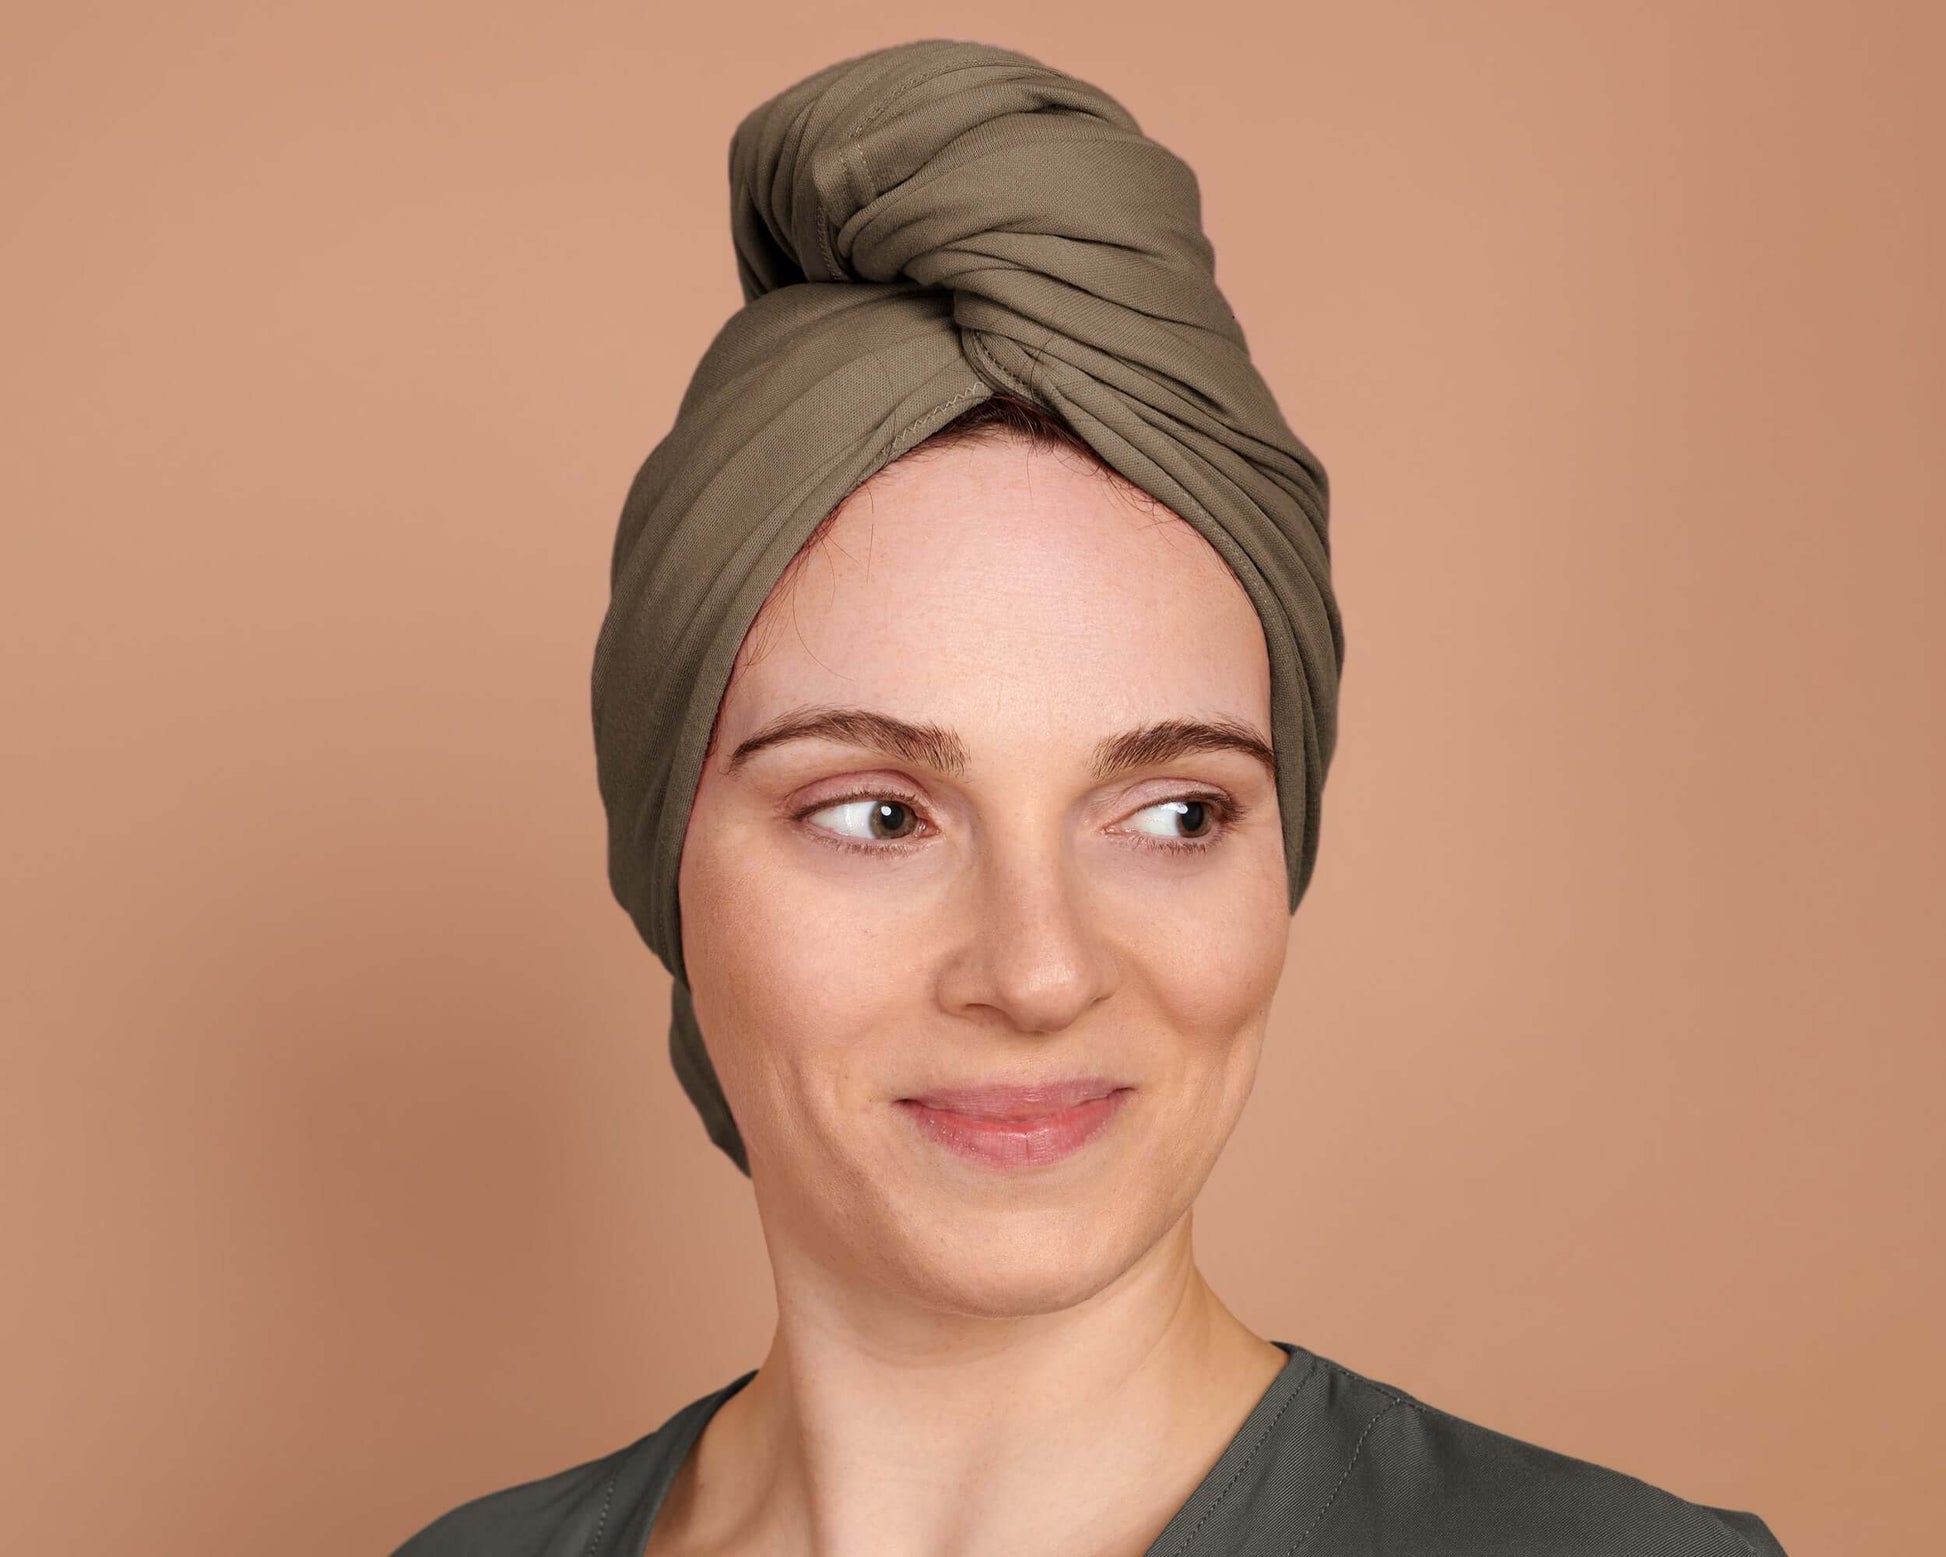 A Brown Khaki T-Shirt Hair Towel for Curly, Wavy, and Straight Hair - Soft, Absorbent, and Eco-Friendly